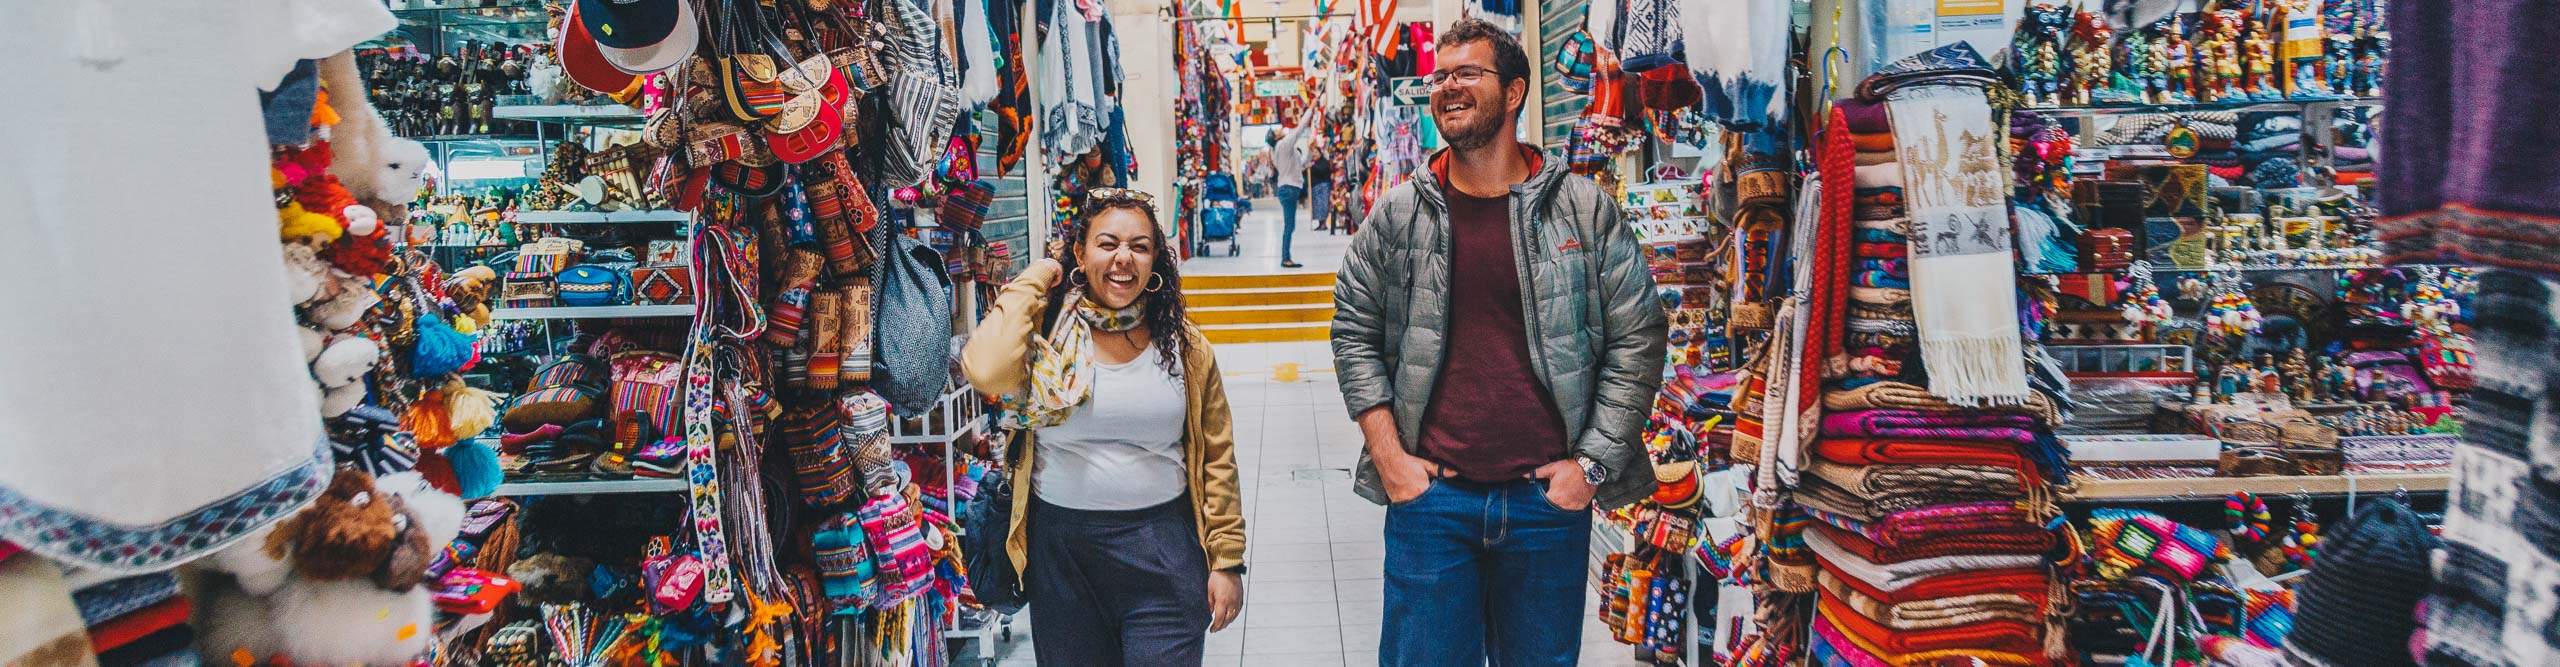 Travellers walking through the colourful markets of Cusco, Peru